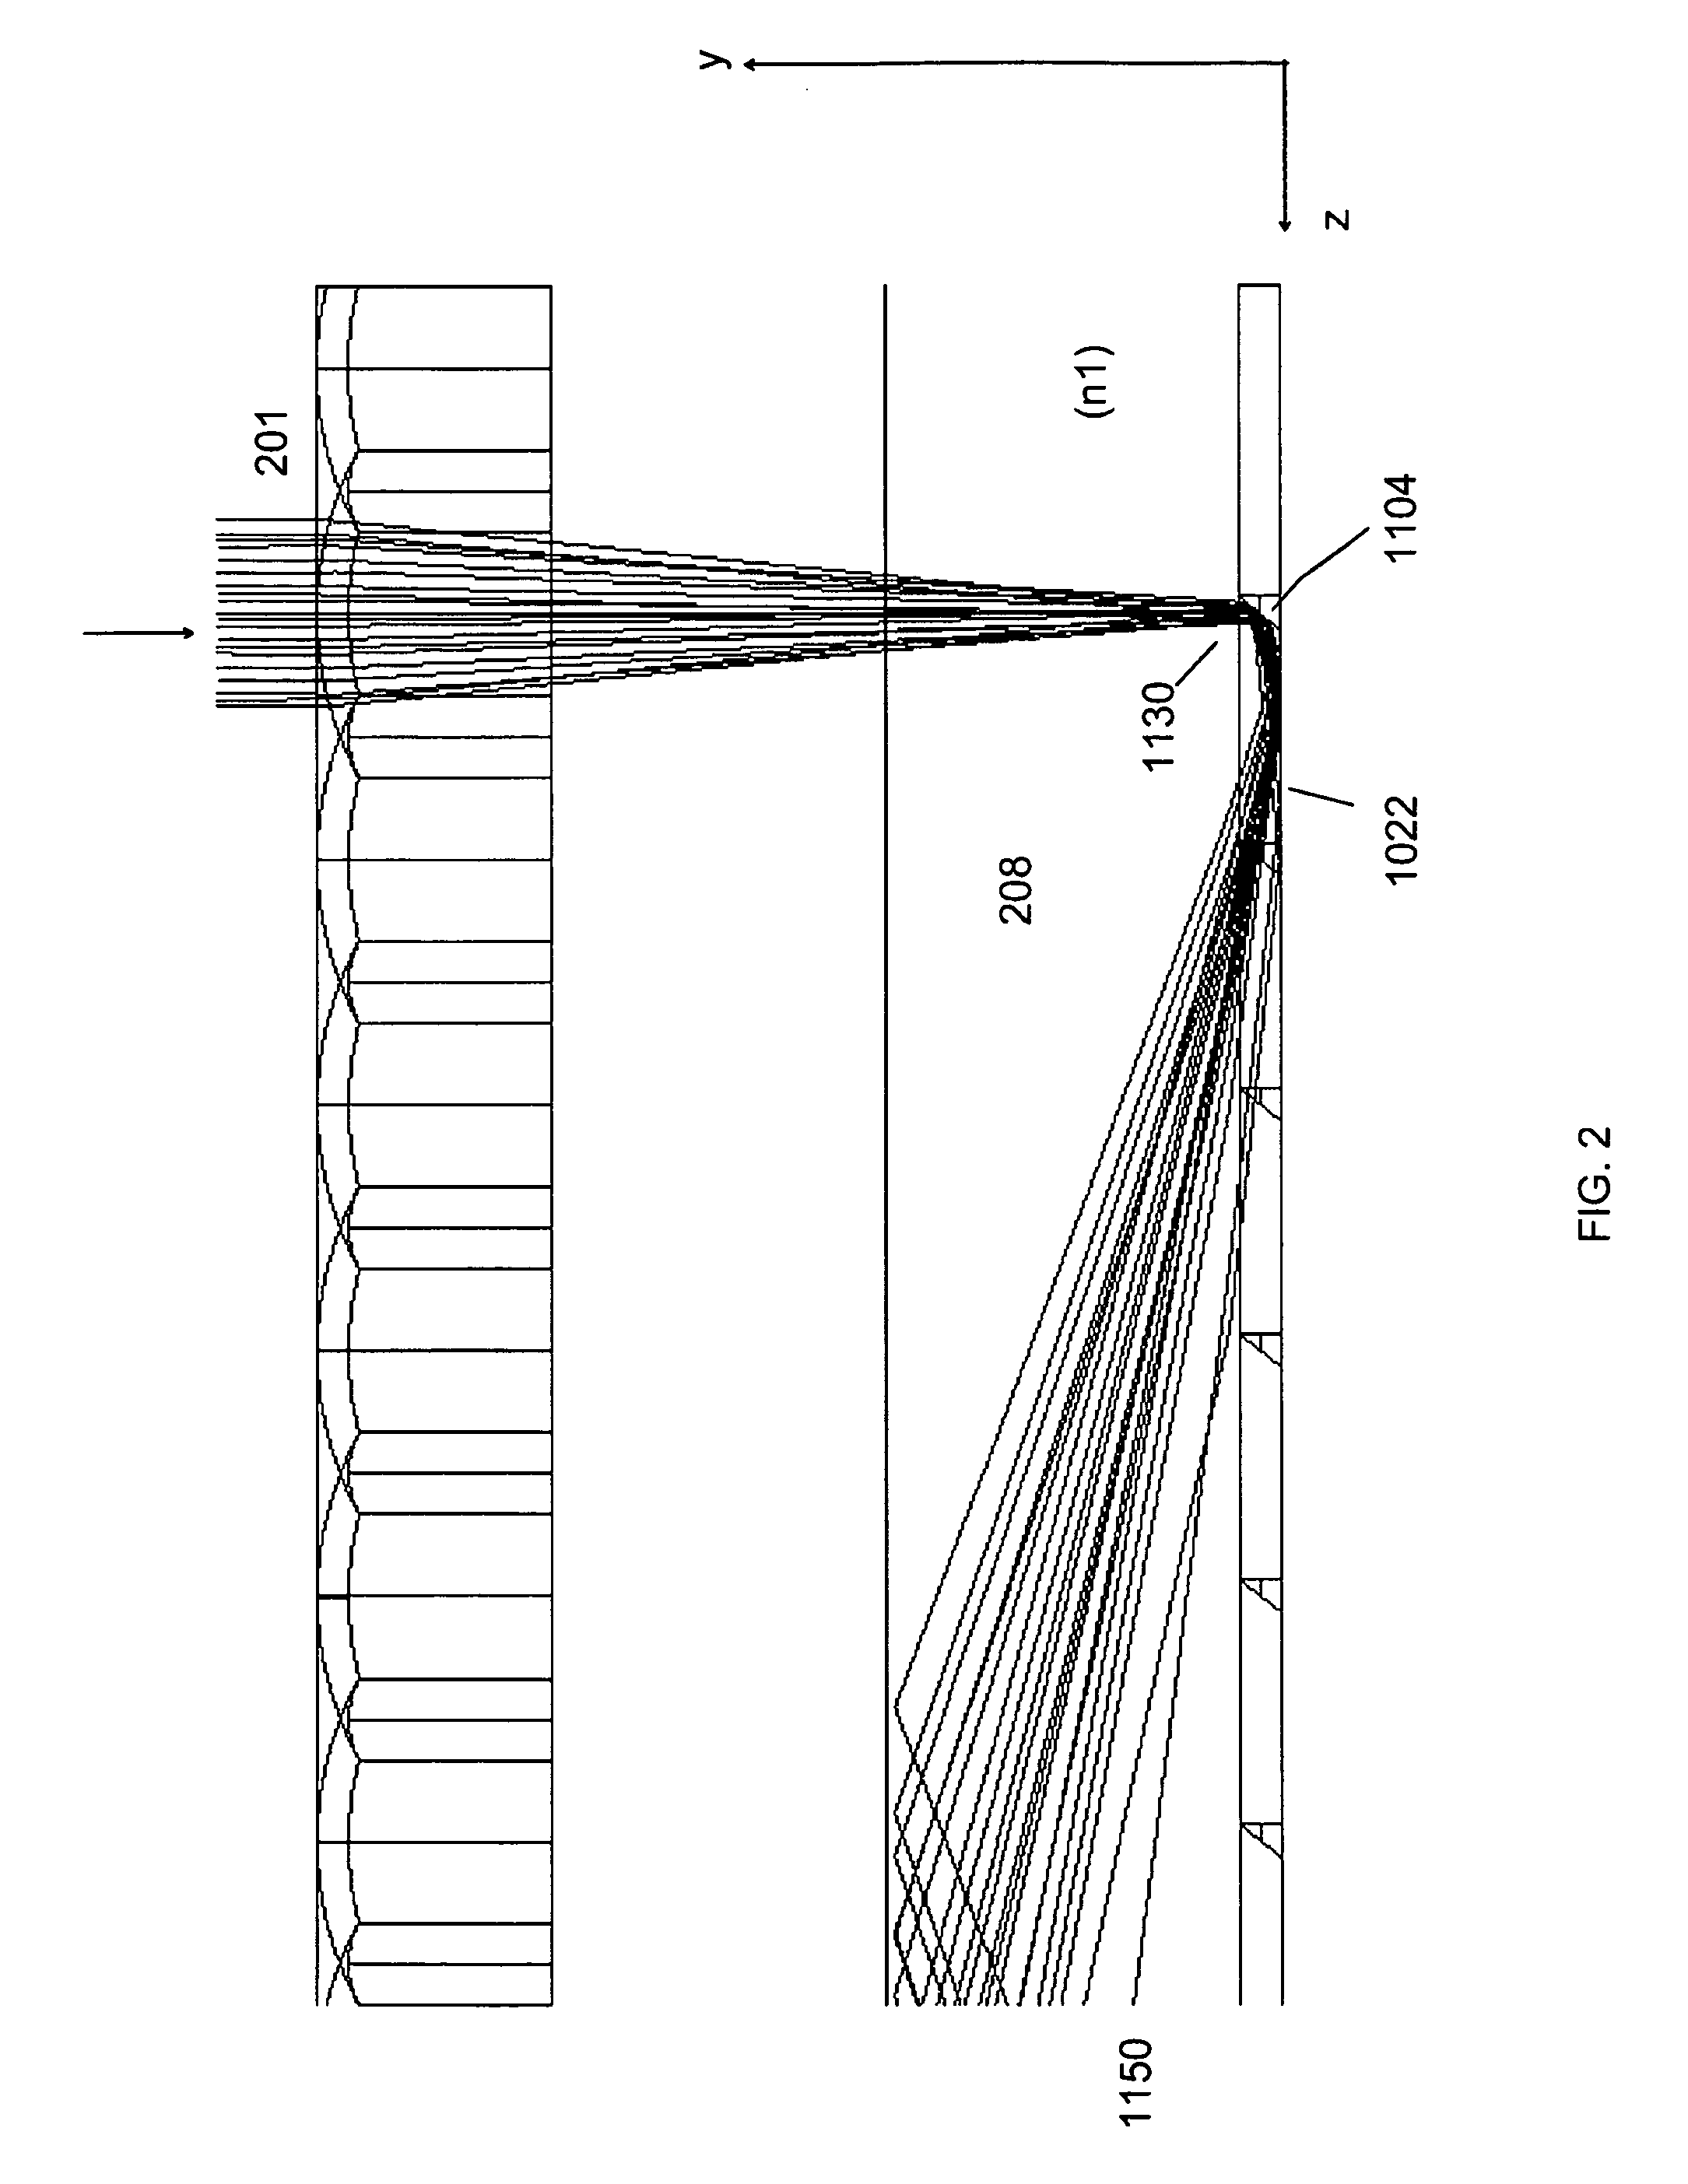 Stepped light collection and concentration system, components thereof, and methods